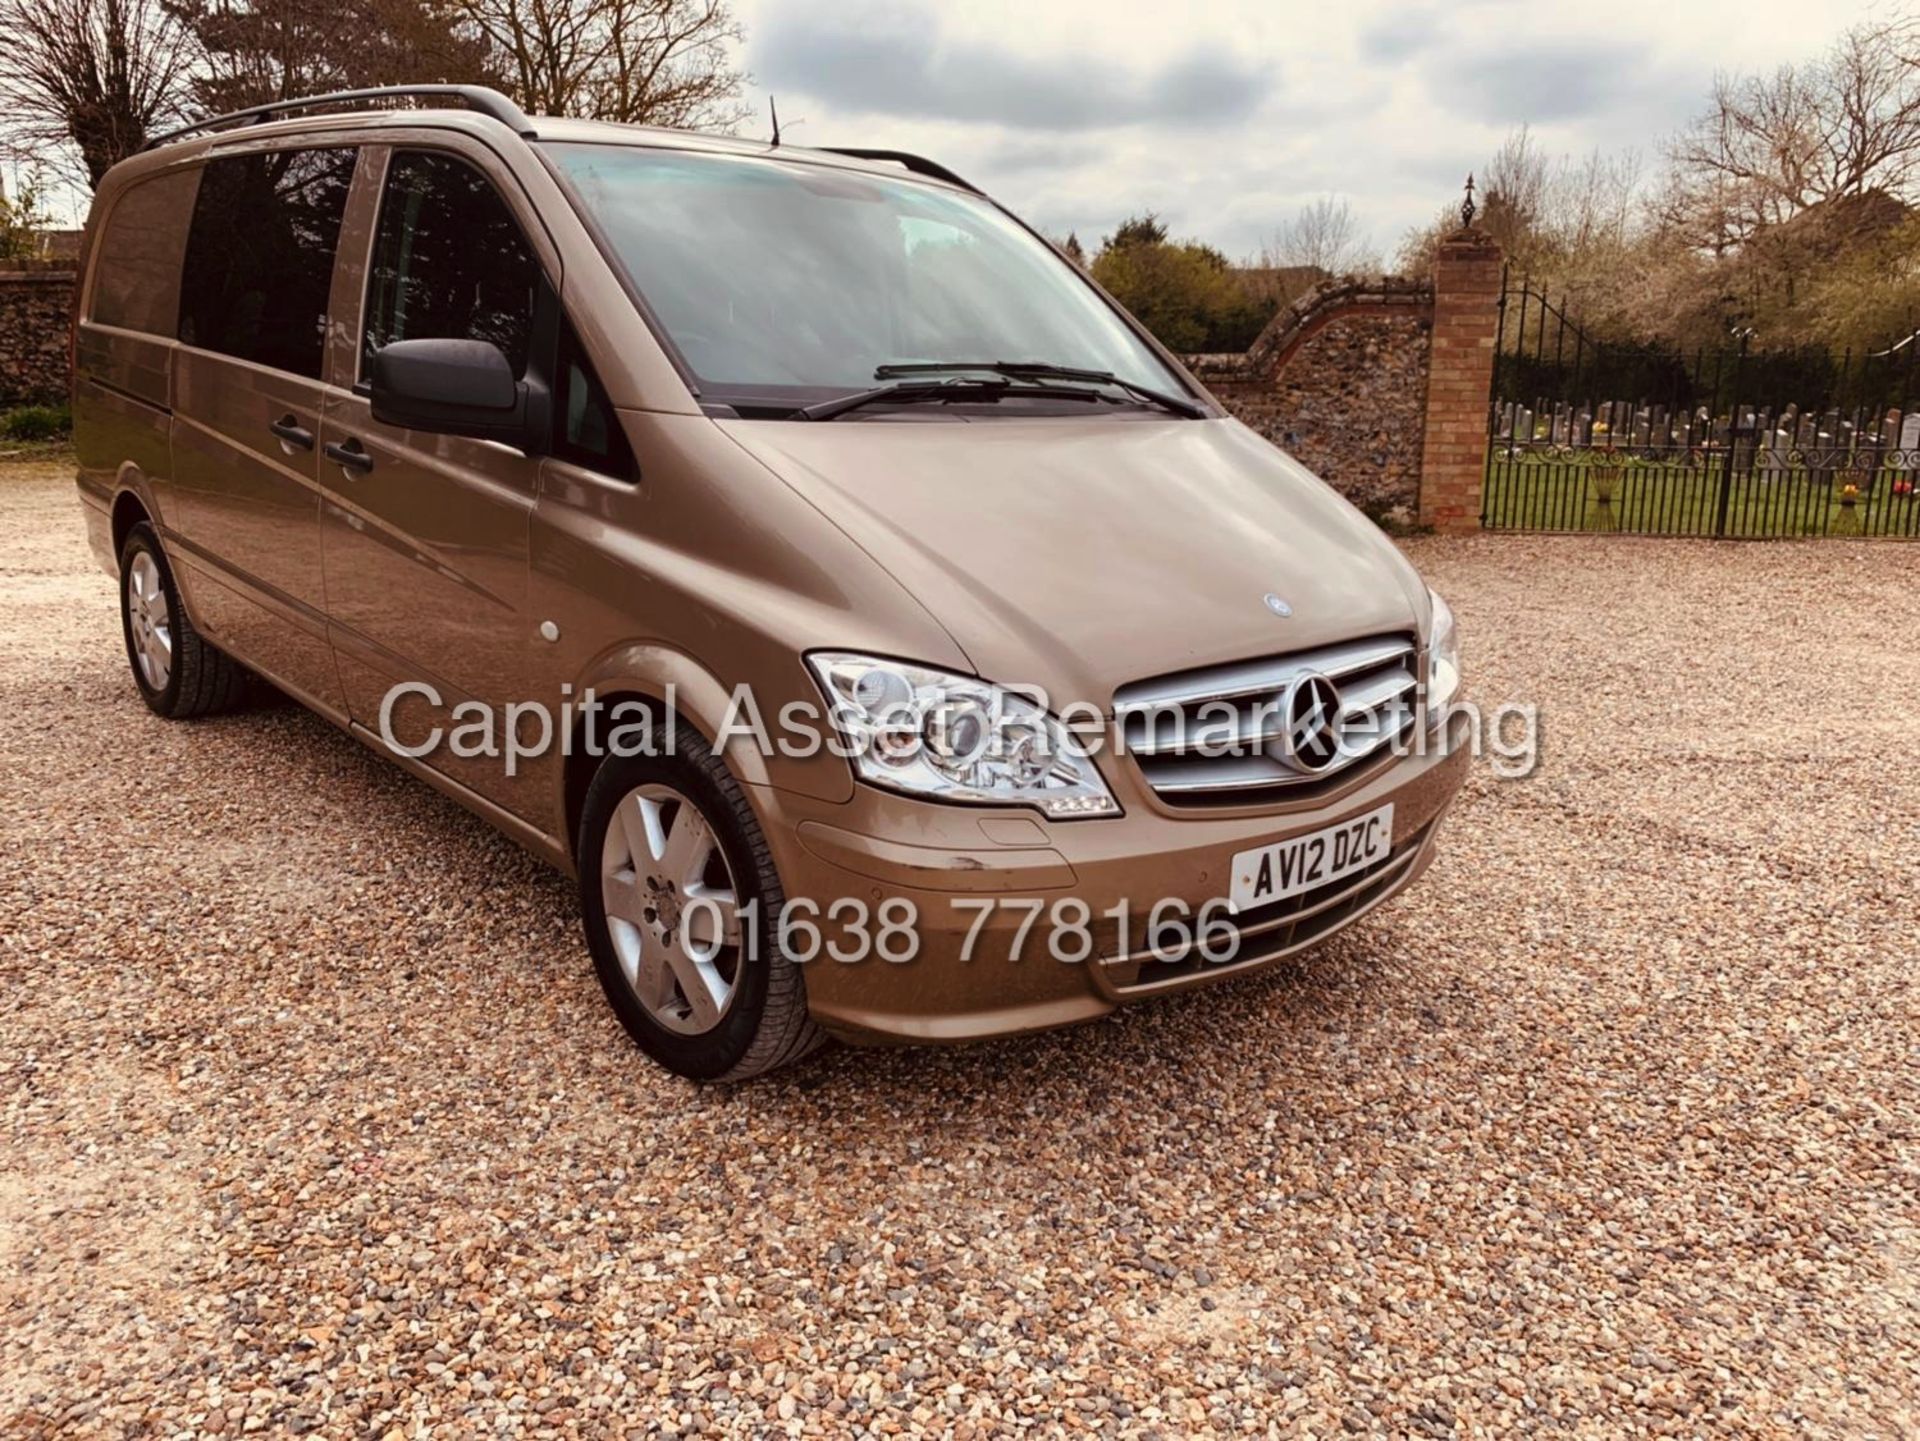 MERCEDES VITO 122CDI *SPORT-X SPEC* 8 SEATER DUALINER LWB (12 REG) 1 OWNER FSH -AIR CON-ALL THE TOYS - Image 4 of 19